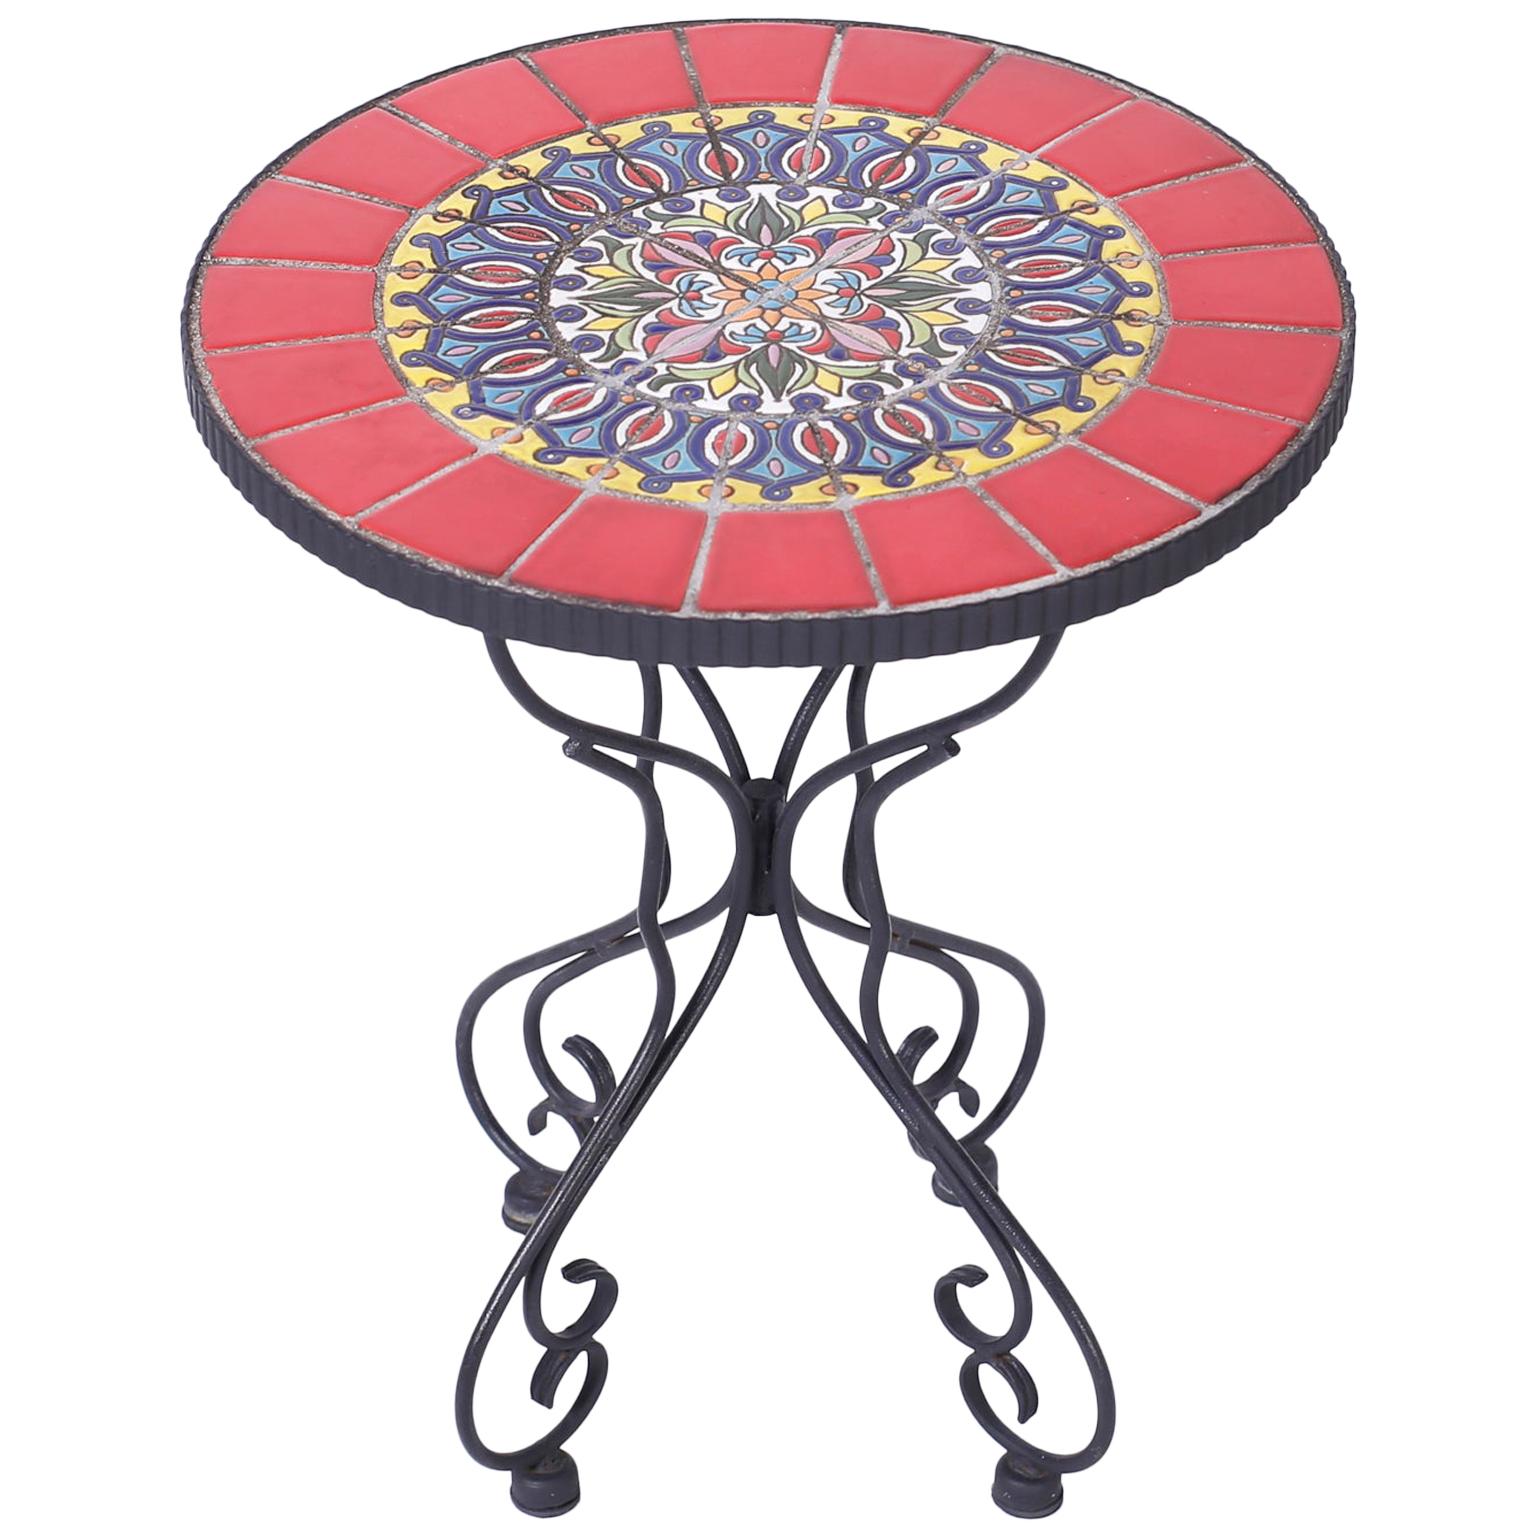 Tile Top and Iron Tabouret or Table For Sale